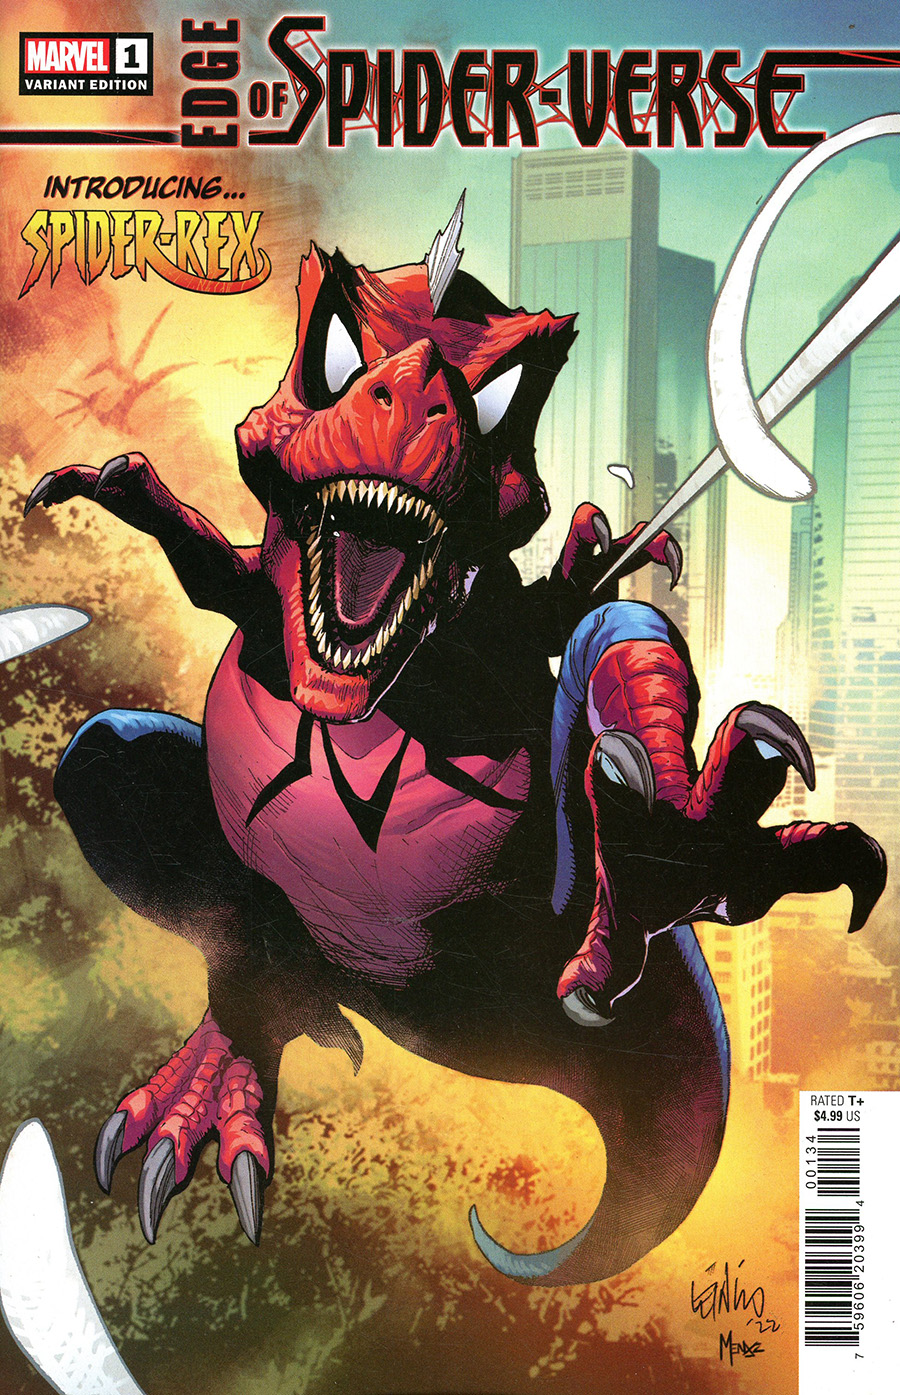 Edge Of Spider-Verse Vol 2 #1 Cover D Variant Leinil Francis Yu Spider-Rex Cover (Limit 1 Per Customer)